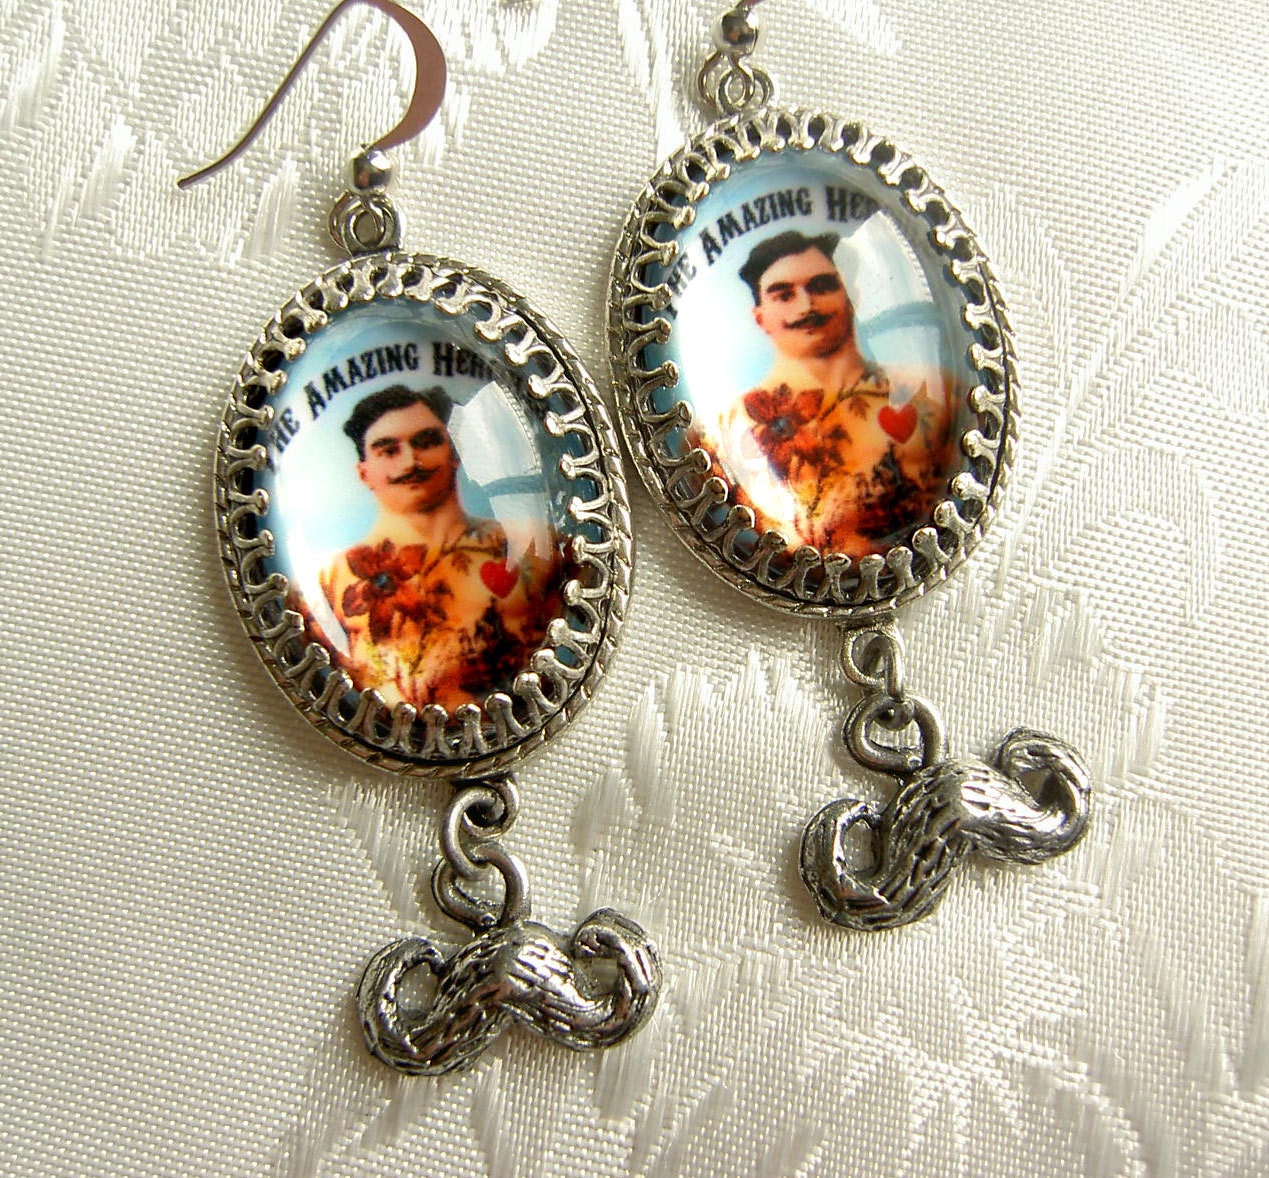 with mustache charm below